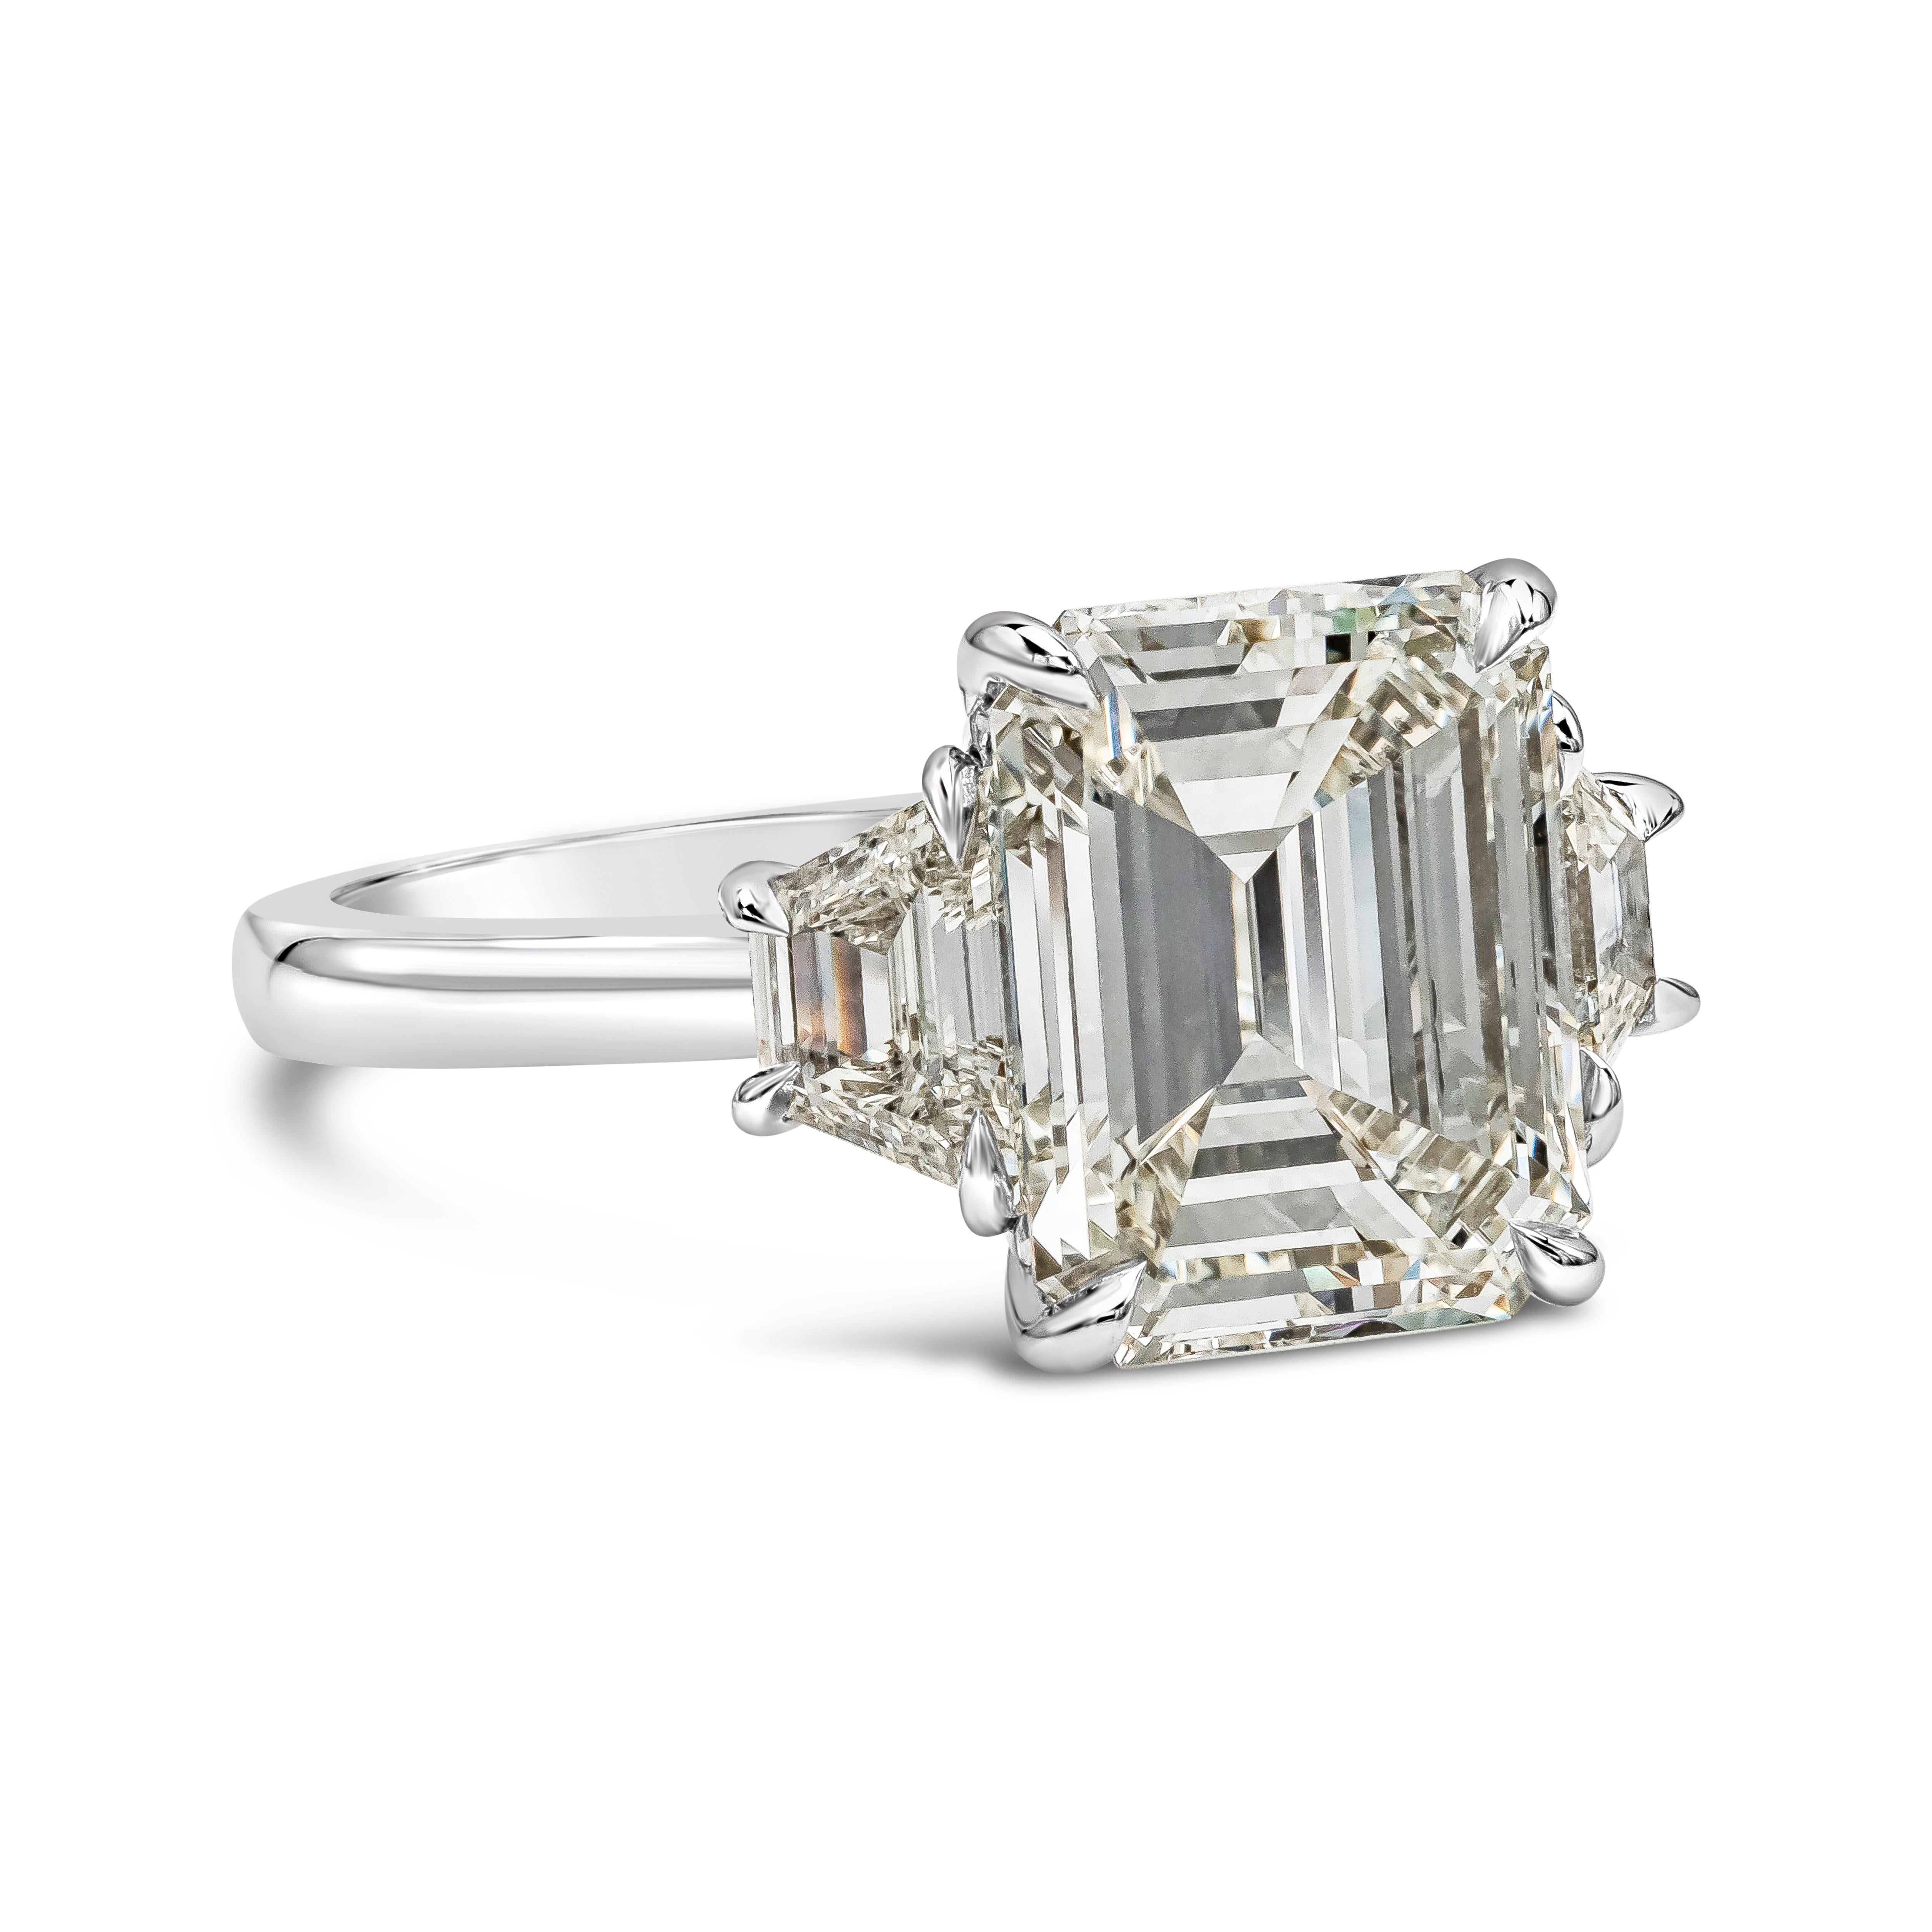 A classic and timeless three-stone engagement ring style showcasing a 4.05 carat emerald cut diamond certified by GIA as K color, VVS2 clarity, flanked by step-cut trapezoid diamonds on either side. Accent diamonds weigh 0.79 carats total. Made in